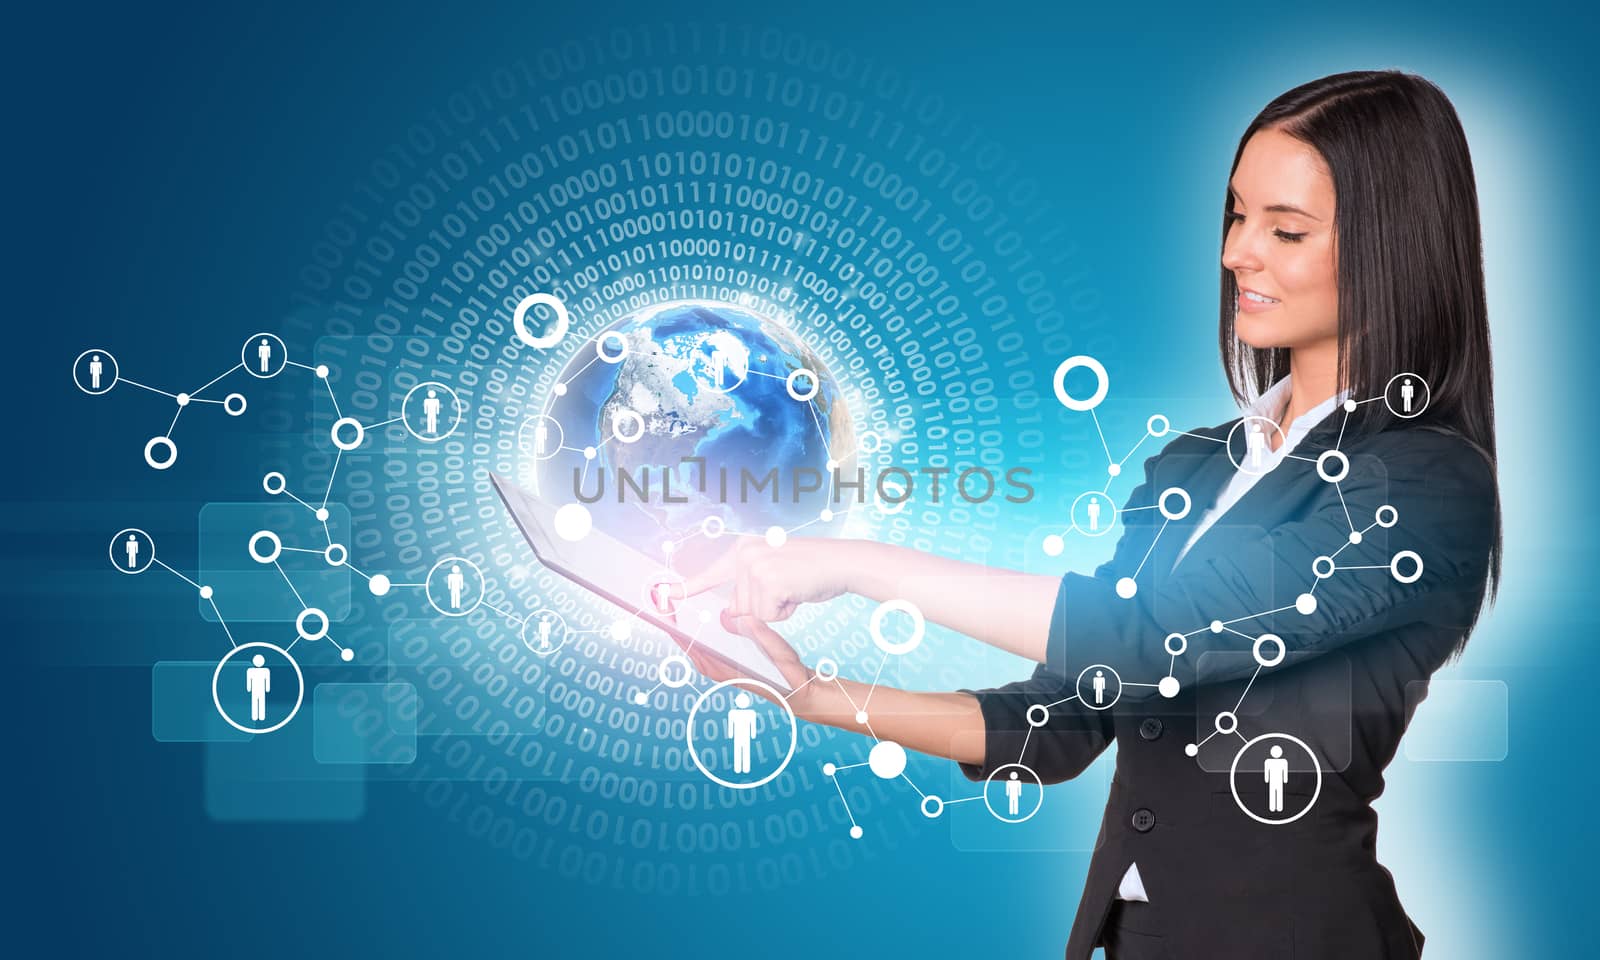 Beautiful businesswomen in suit using digital tablet. Earth with figures and network. Element of this image furnished by NASA